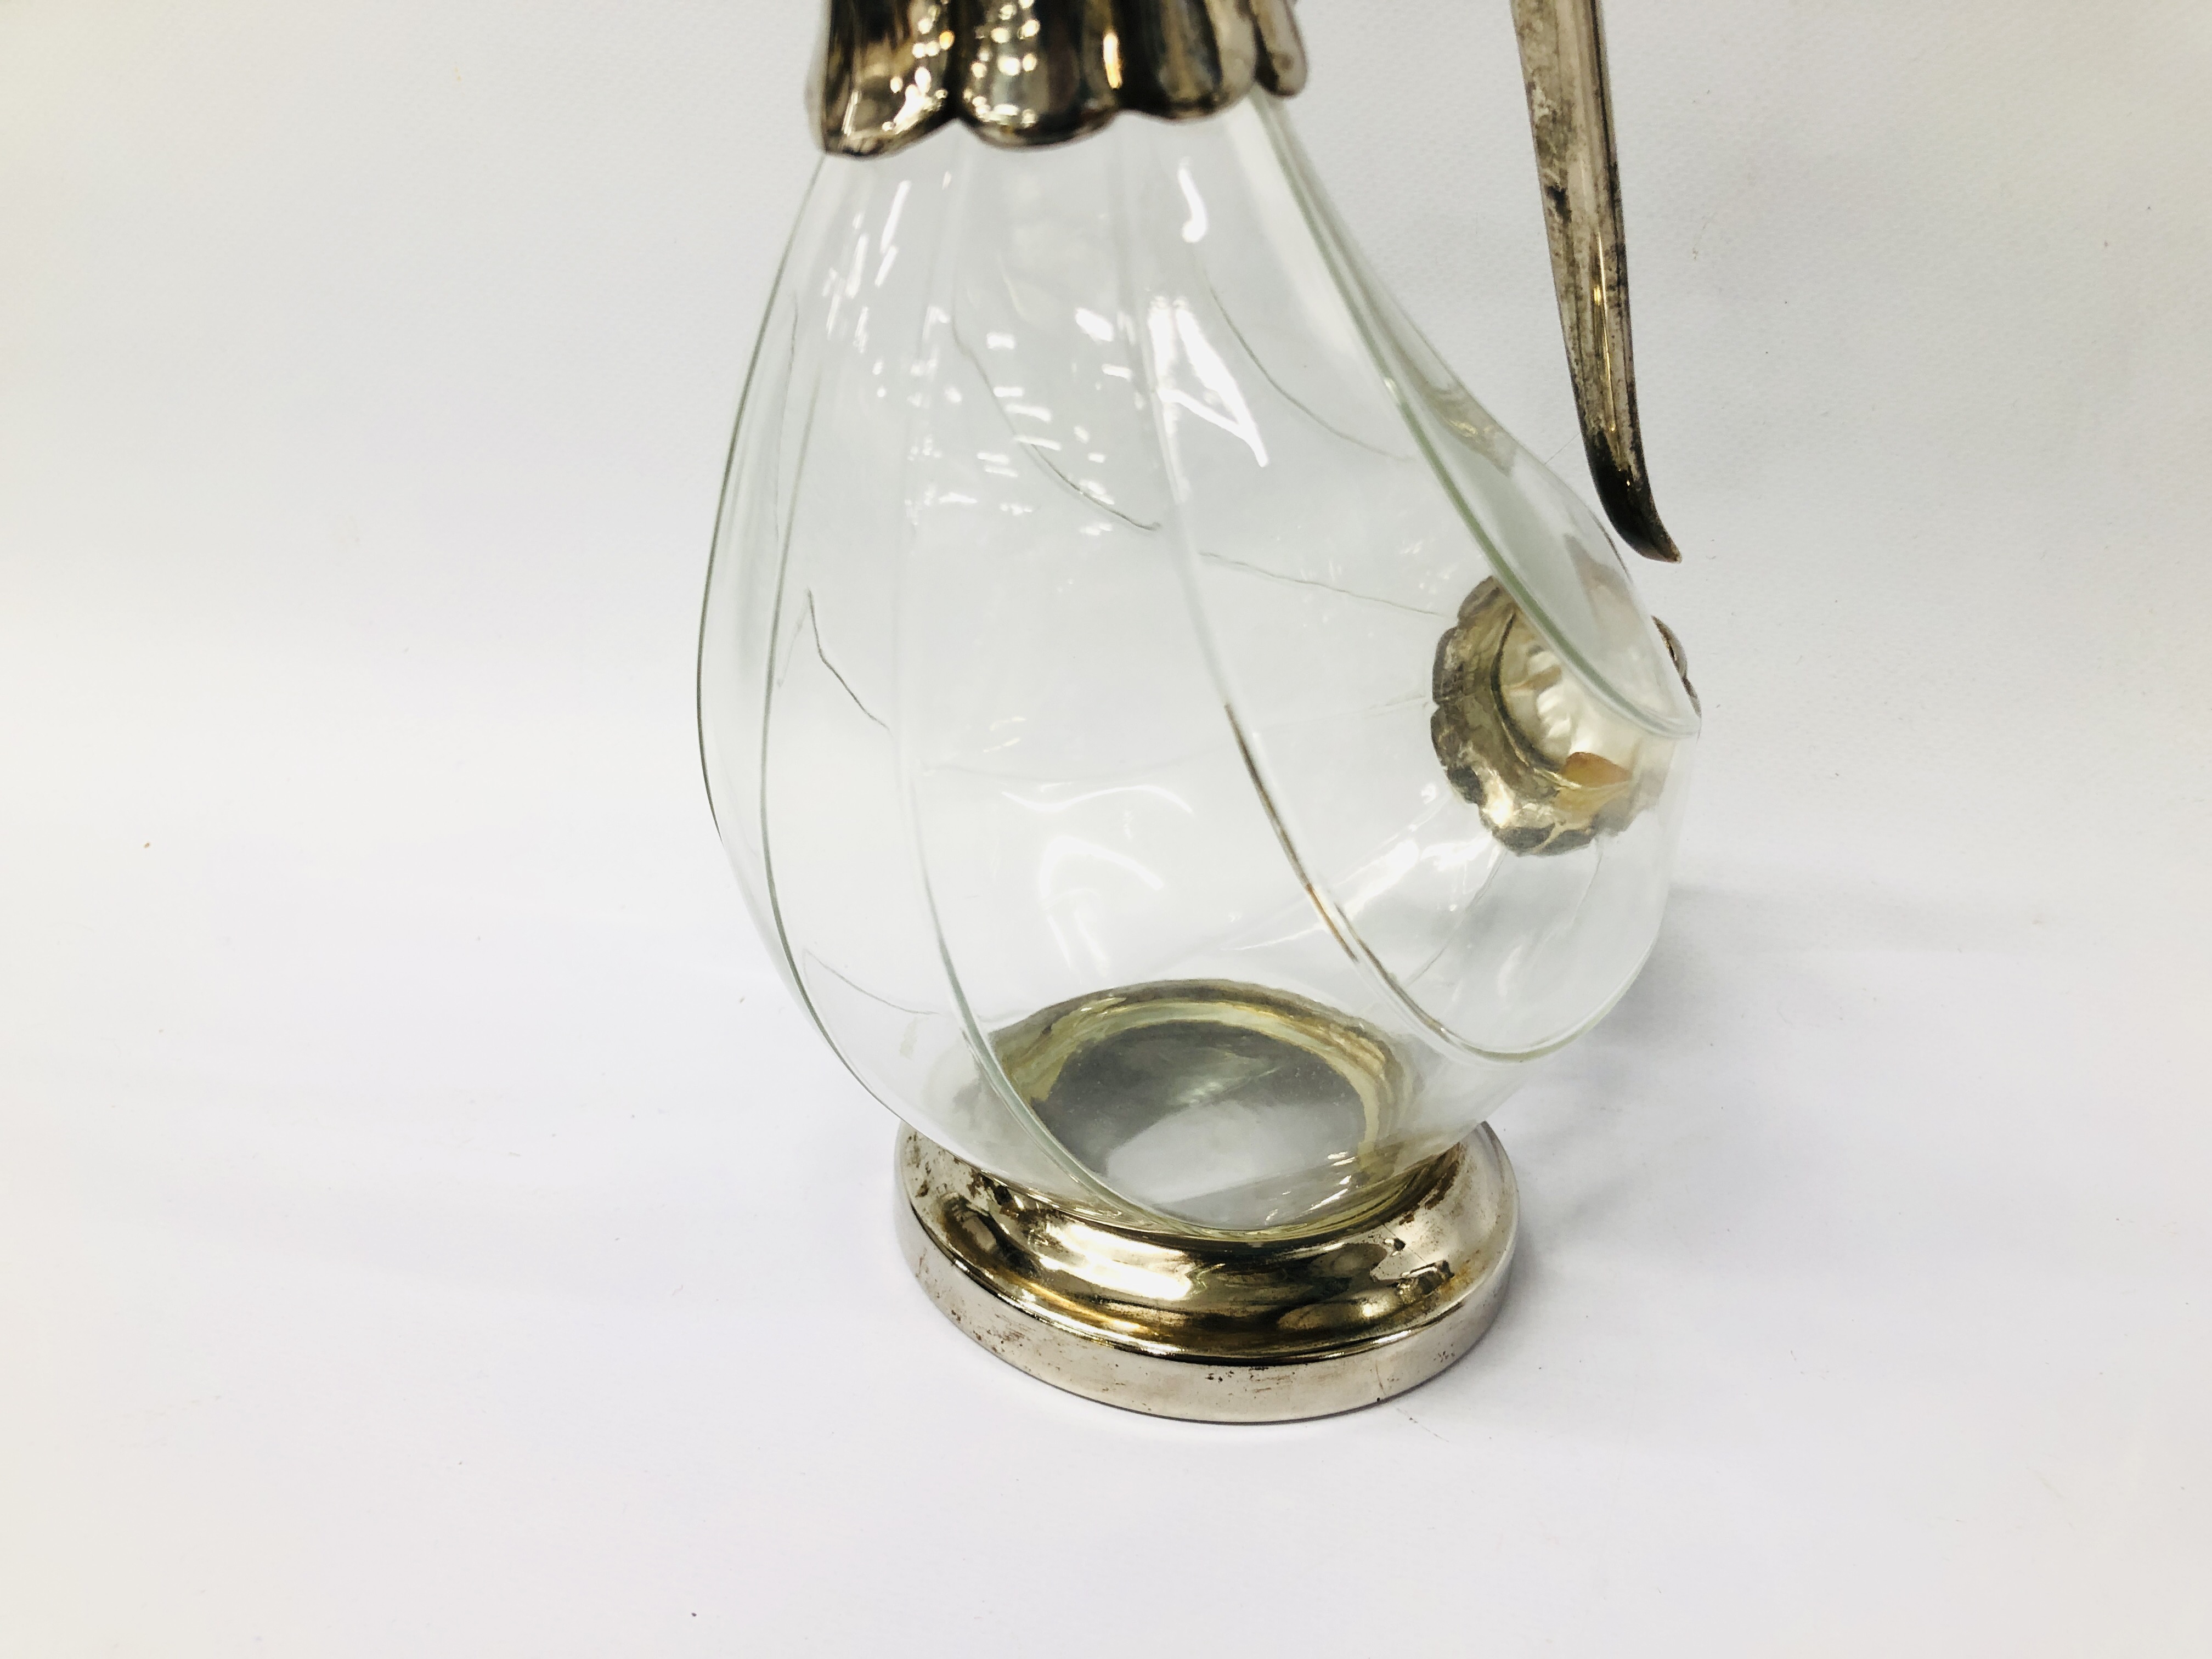 A SILVER PLATED DECANTER FASHIONED AS DUCK, A SILVER PLATED DECANTER FASHIONED AS DUCK, - Image 6 of 24